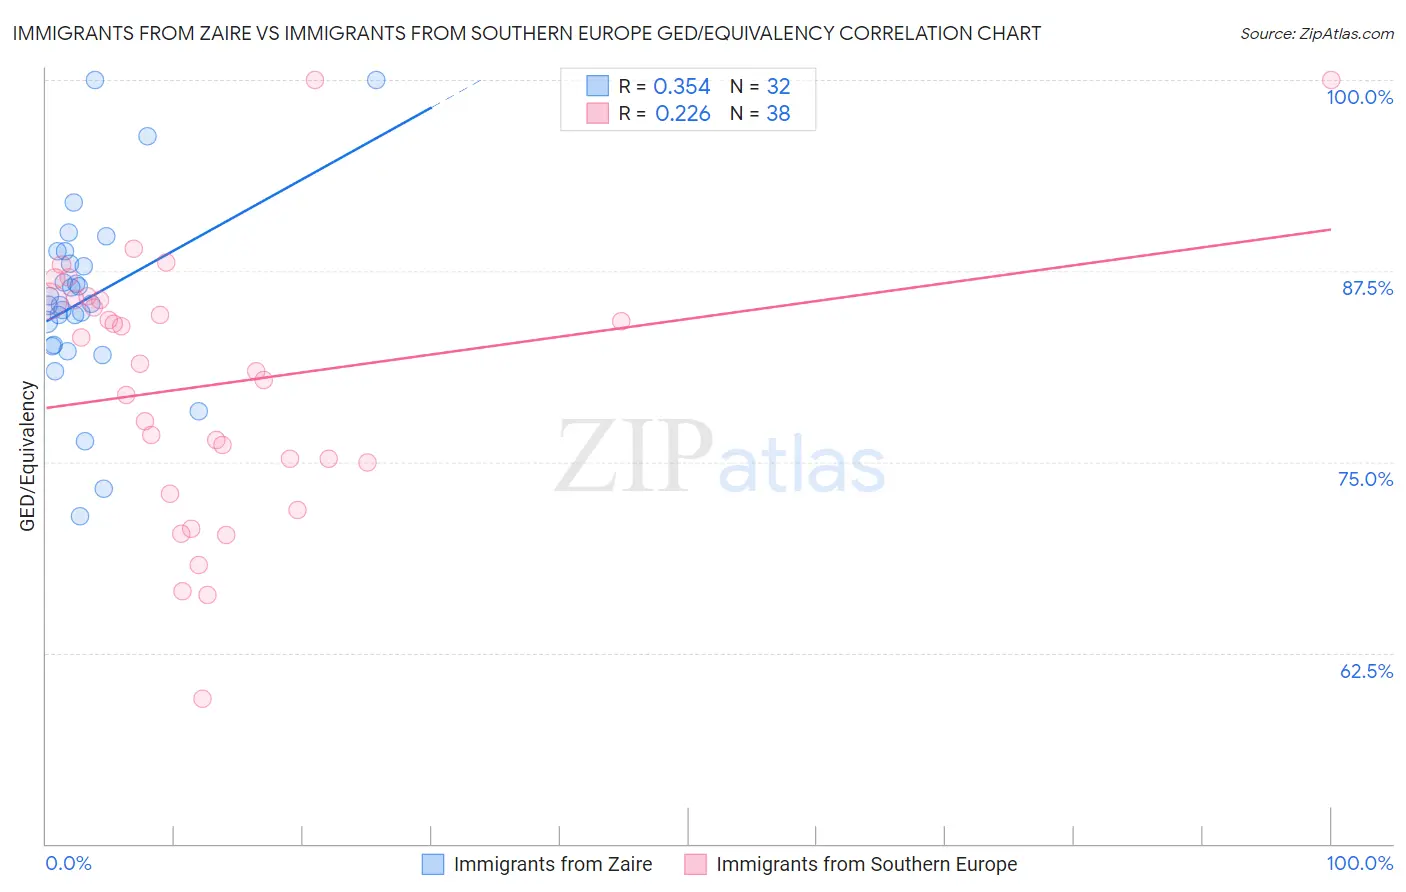 Immigrants from Zaire vs Immigrants from Southern Europe GED/Equivalency